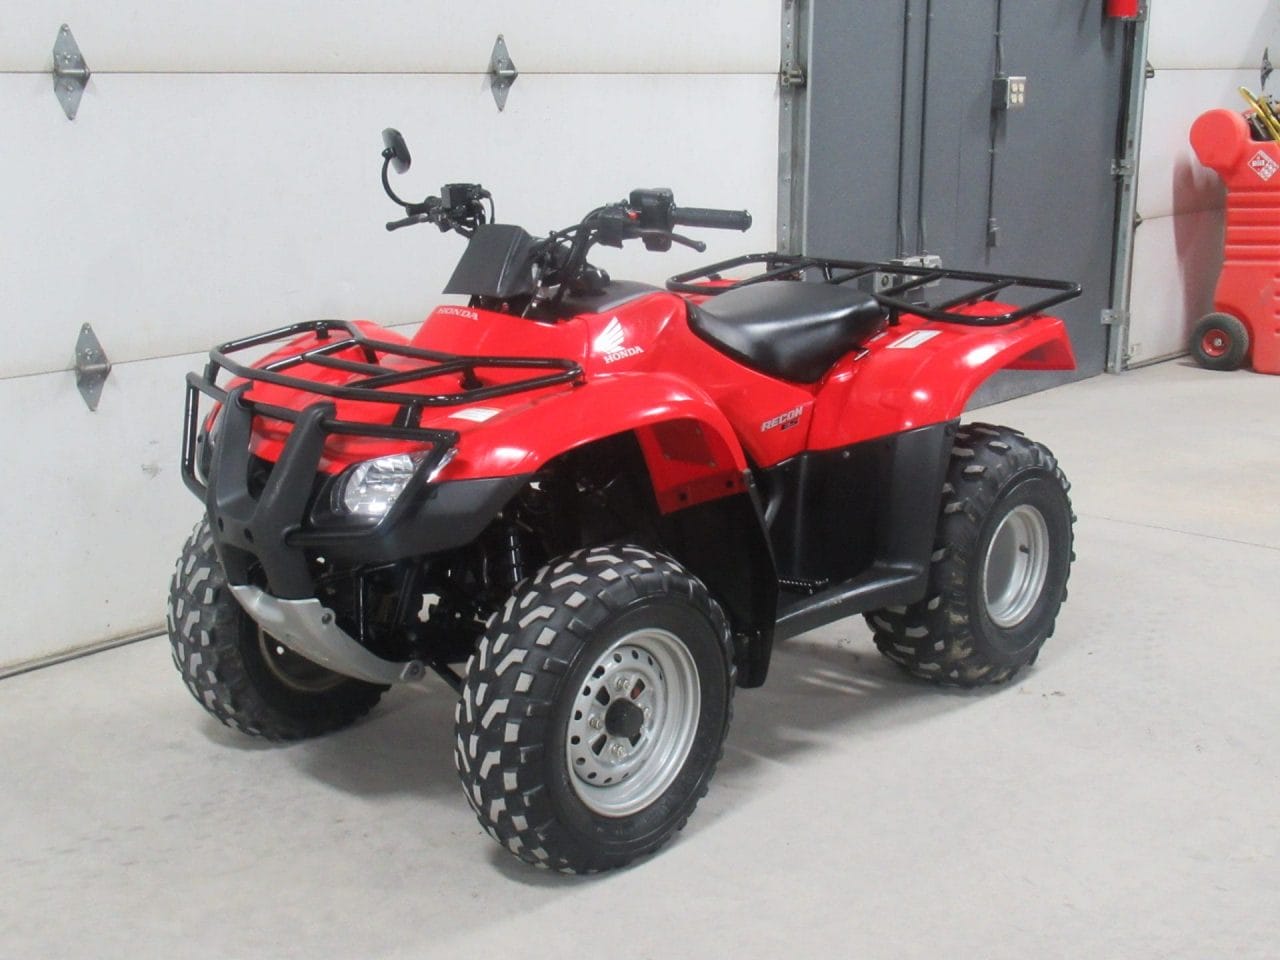 2007 Honda Recon 250 2wd * Great Condition * Street Legal * 